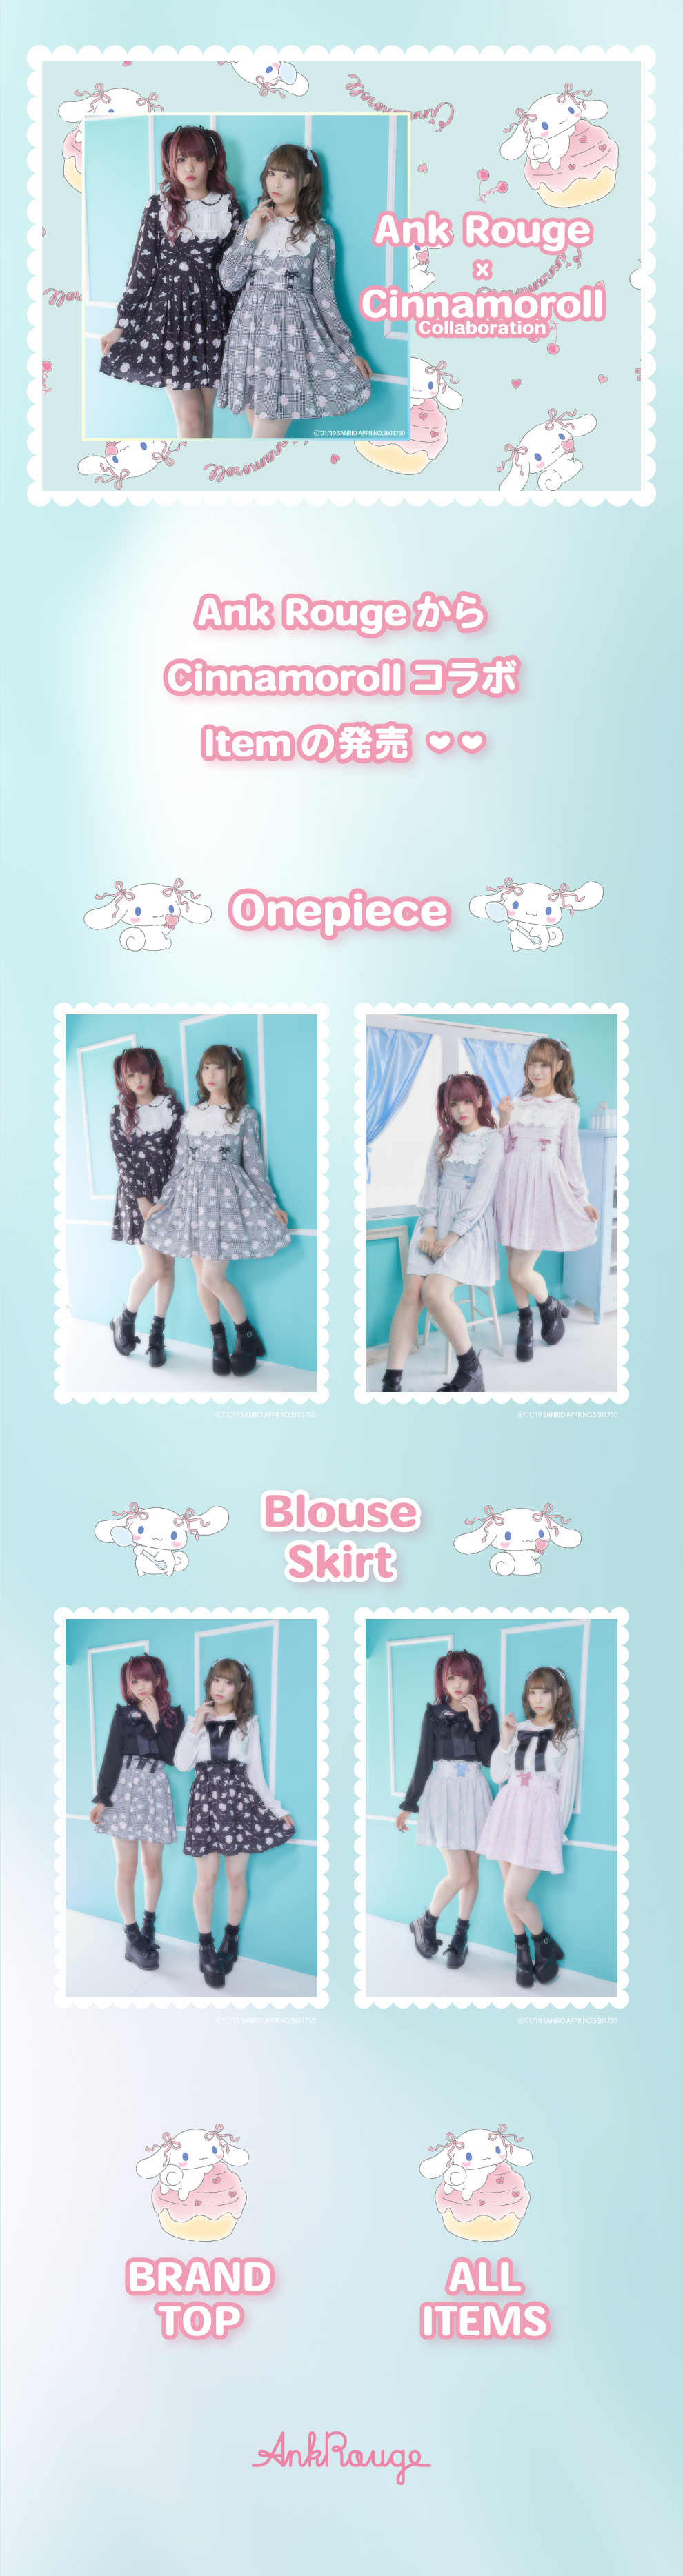 Ank Rouge × Cinnamoroll Collaboration Item